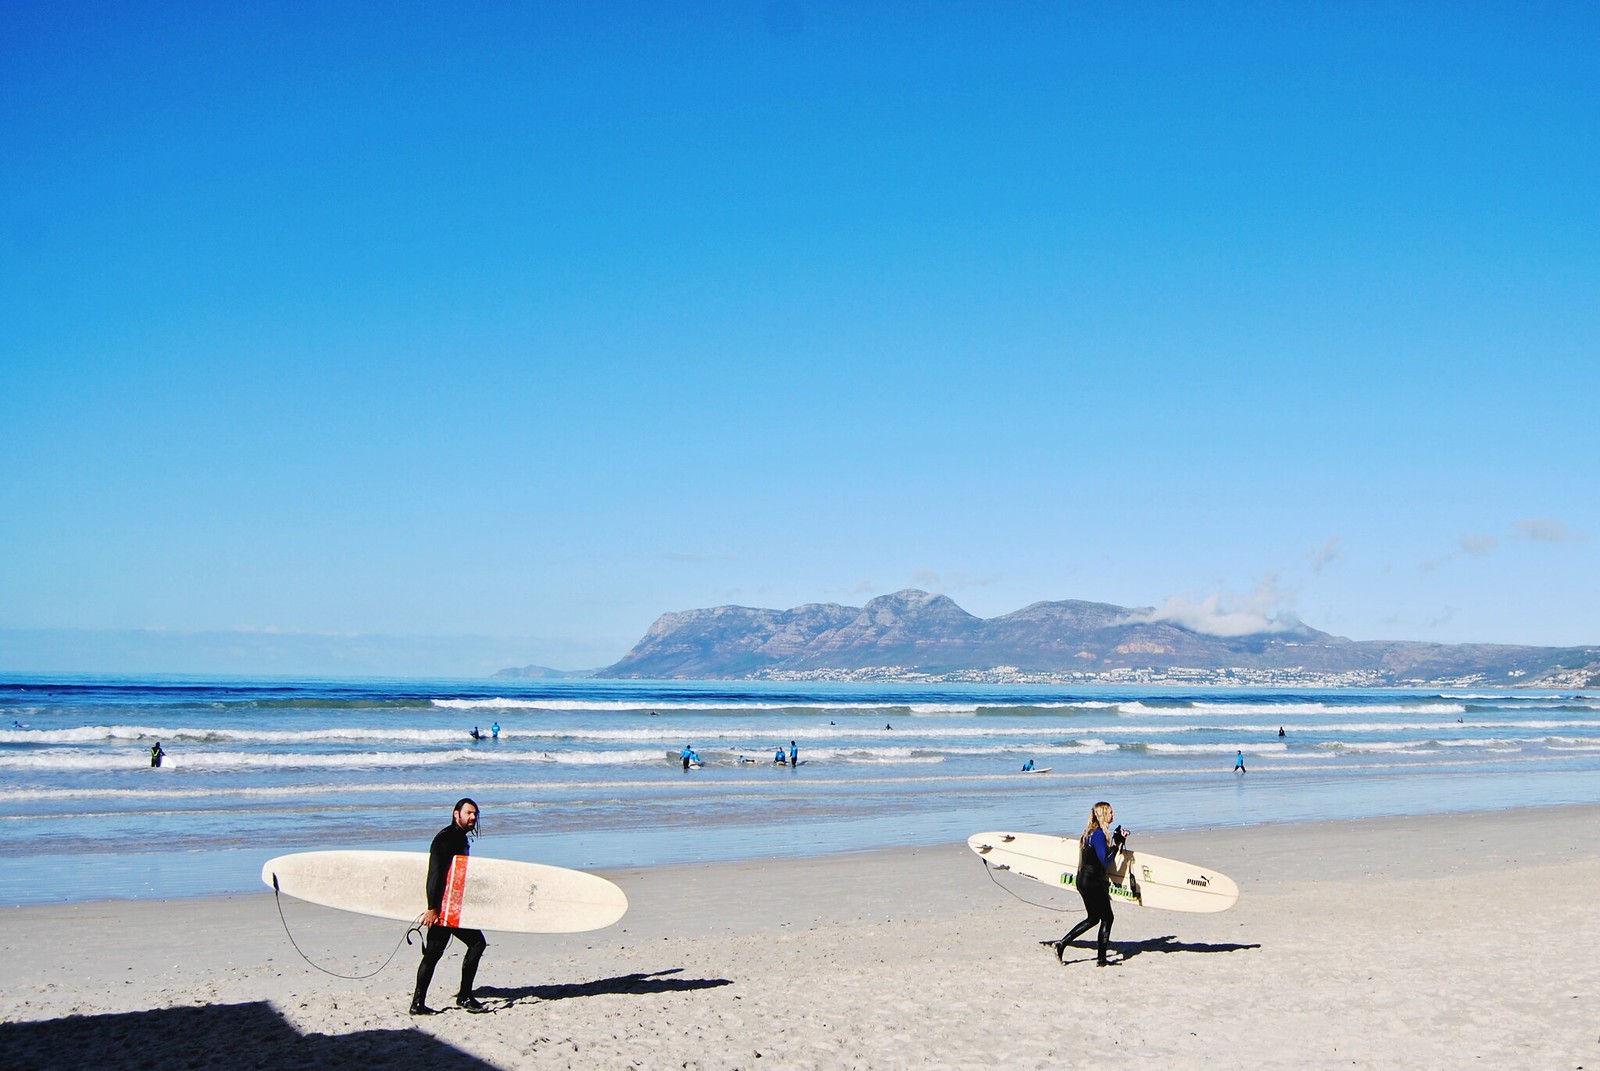 Surfing at Muizenberg Beach, South Africa.